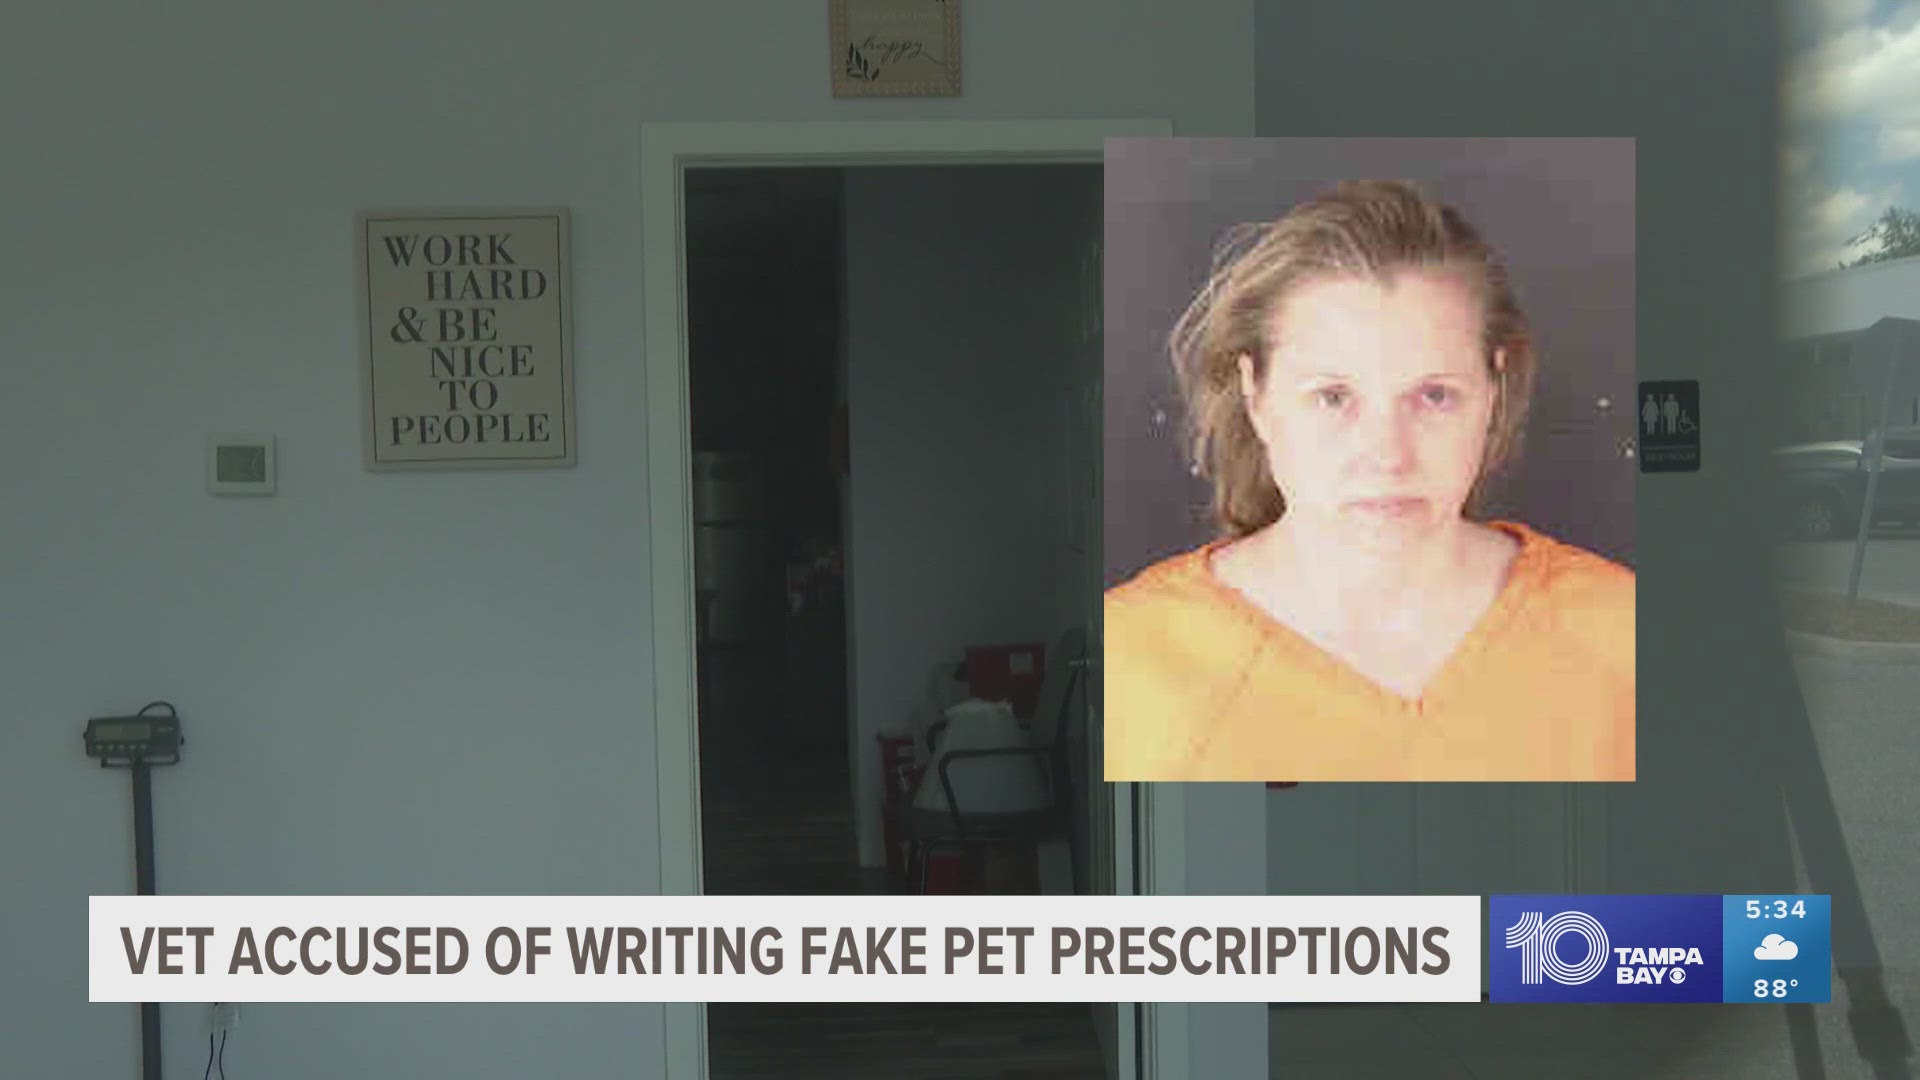 She is accused of fraudulently prescribing medication for an animal in her care, and picking up the medication for herself.